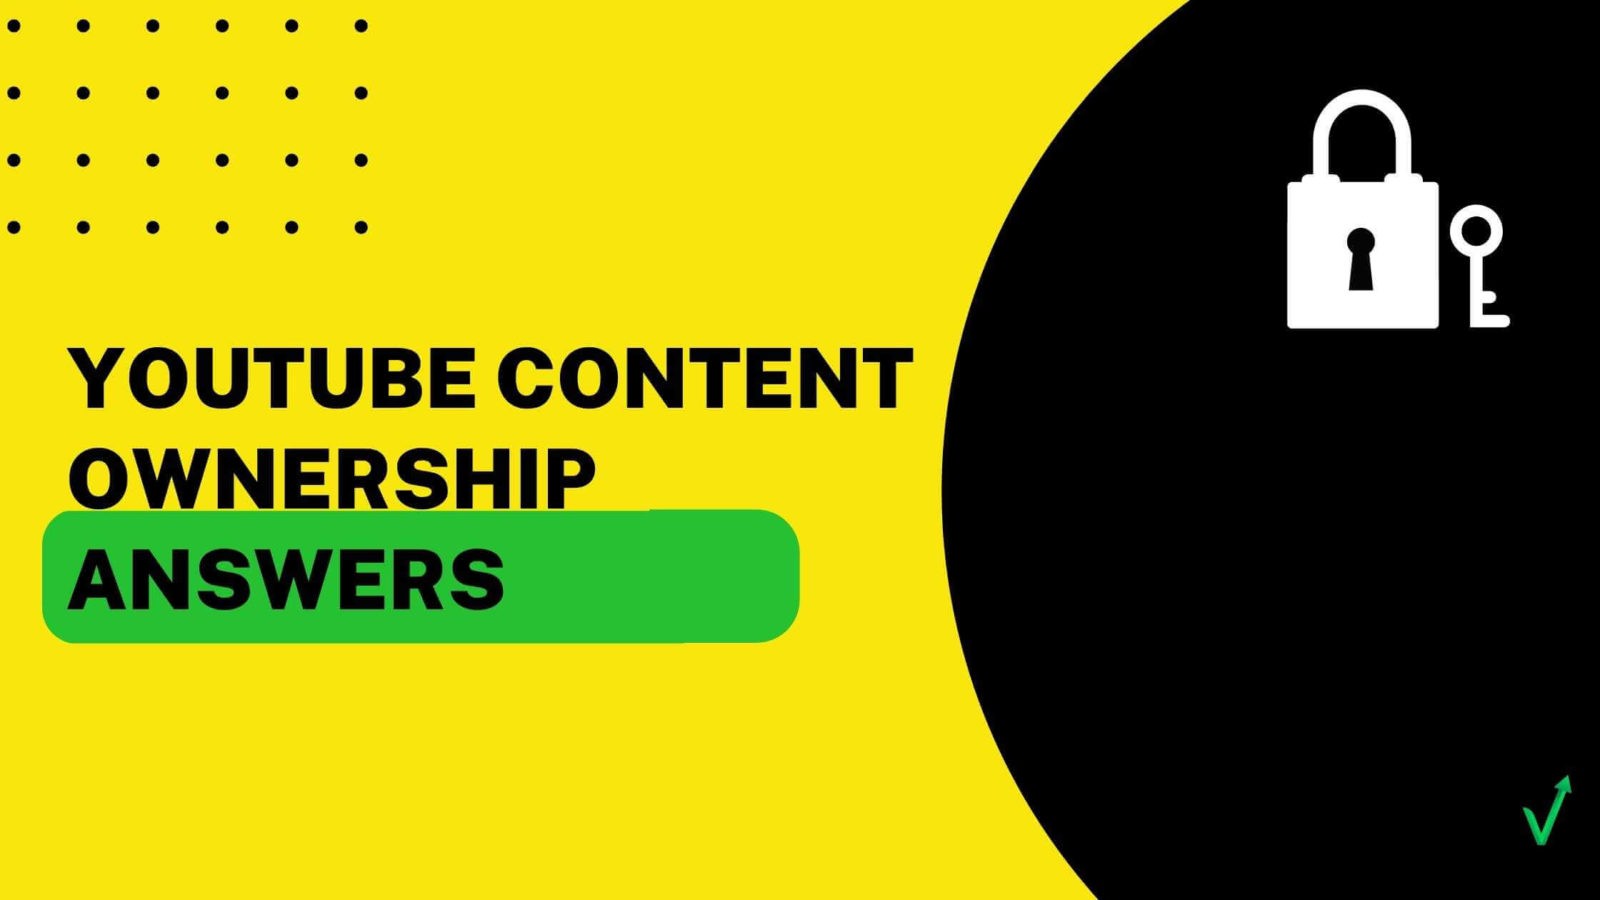 YouTube Content Ownership1 1